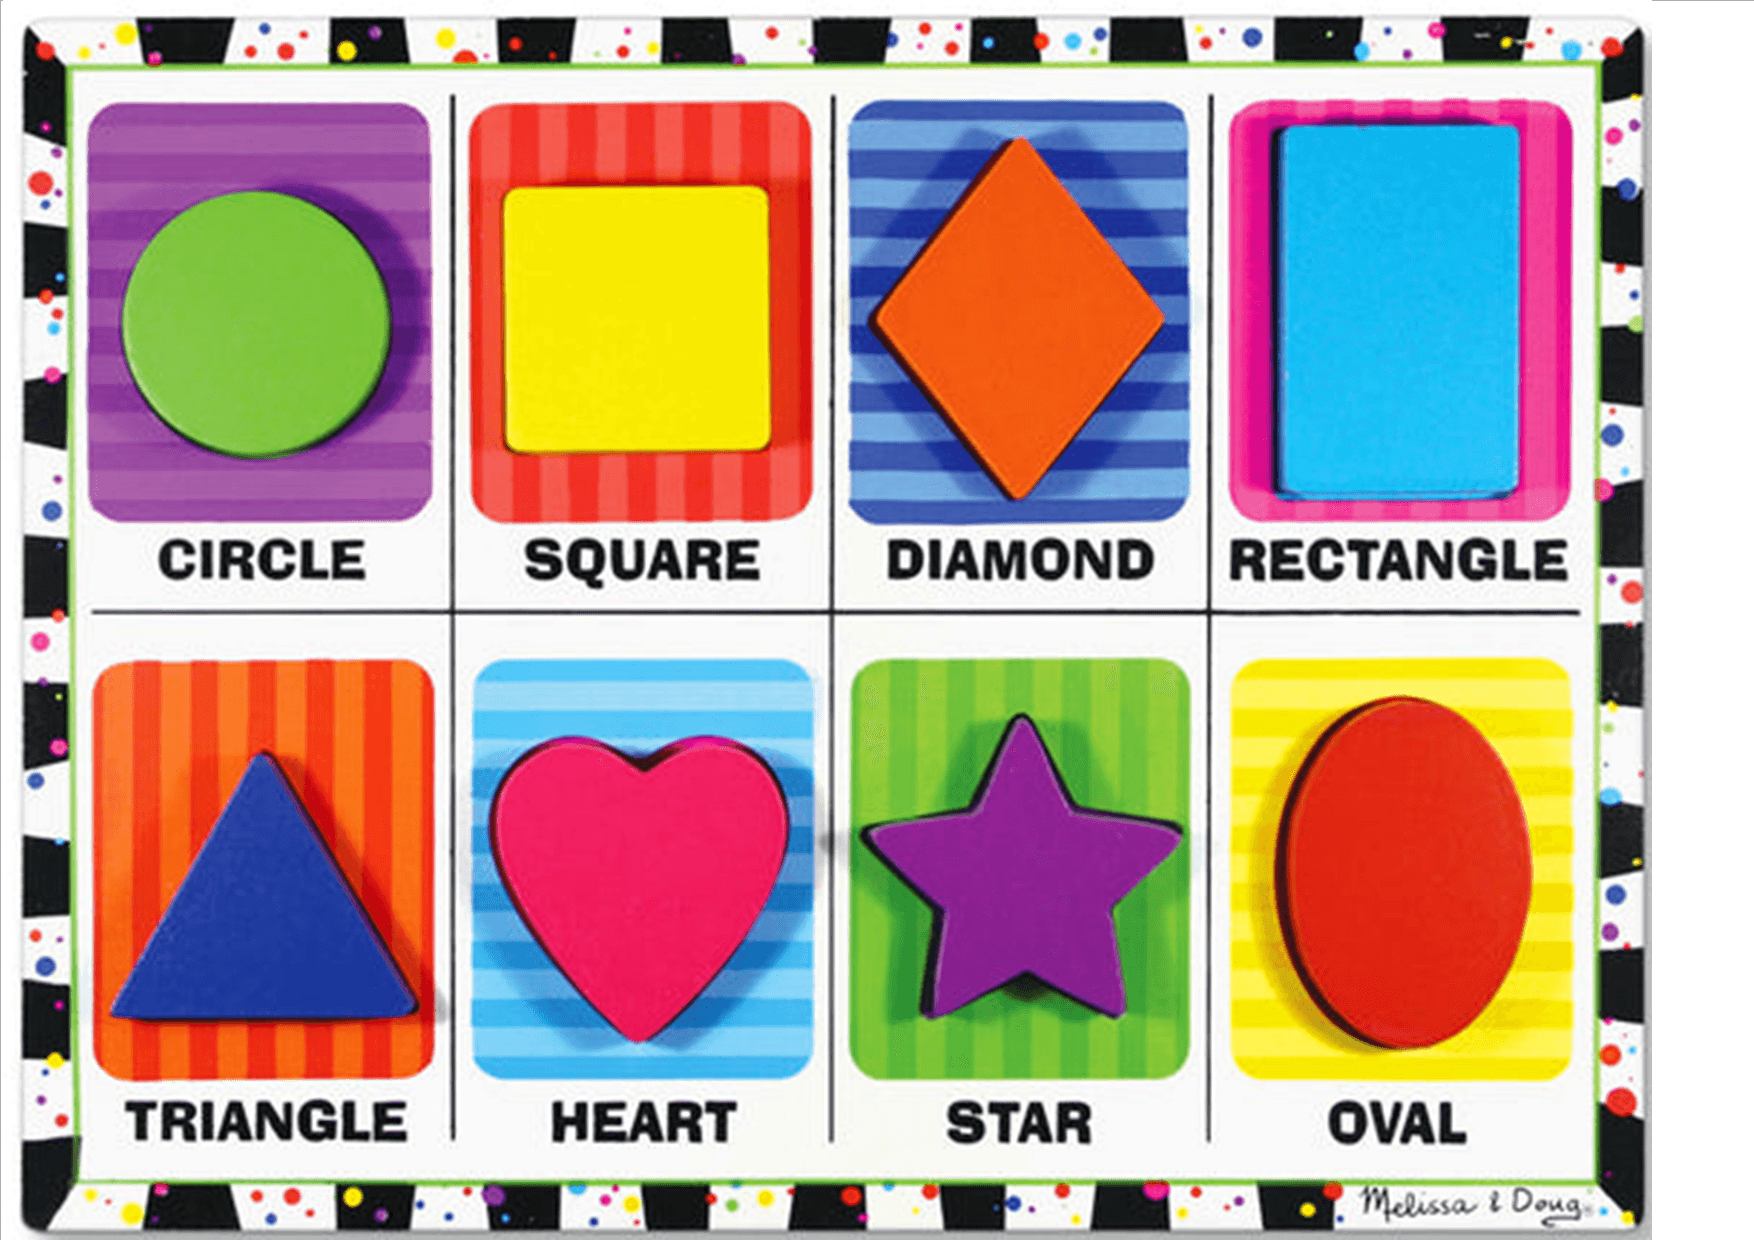 MELISSA & DOUG Puzzle Chunky Shapes: Encourages hand-eye coordination, fine motor skills and visual perception skills - M&D-3730